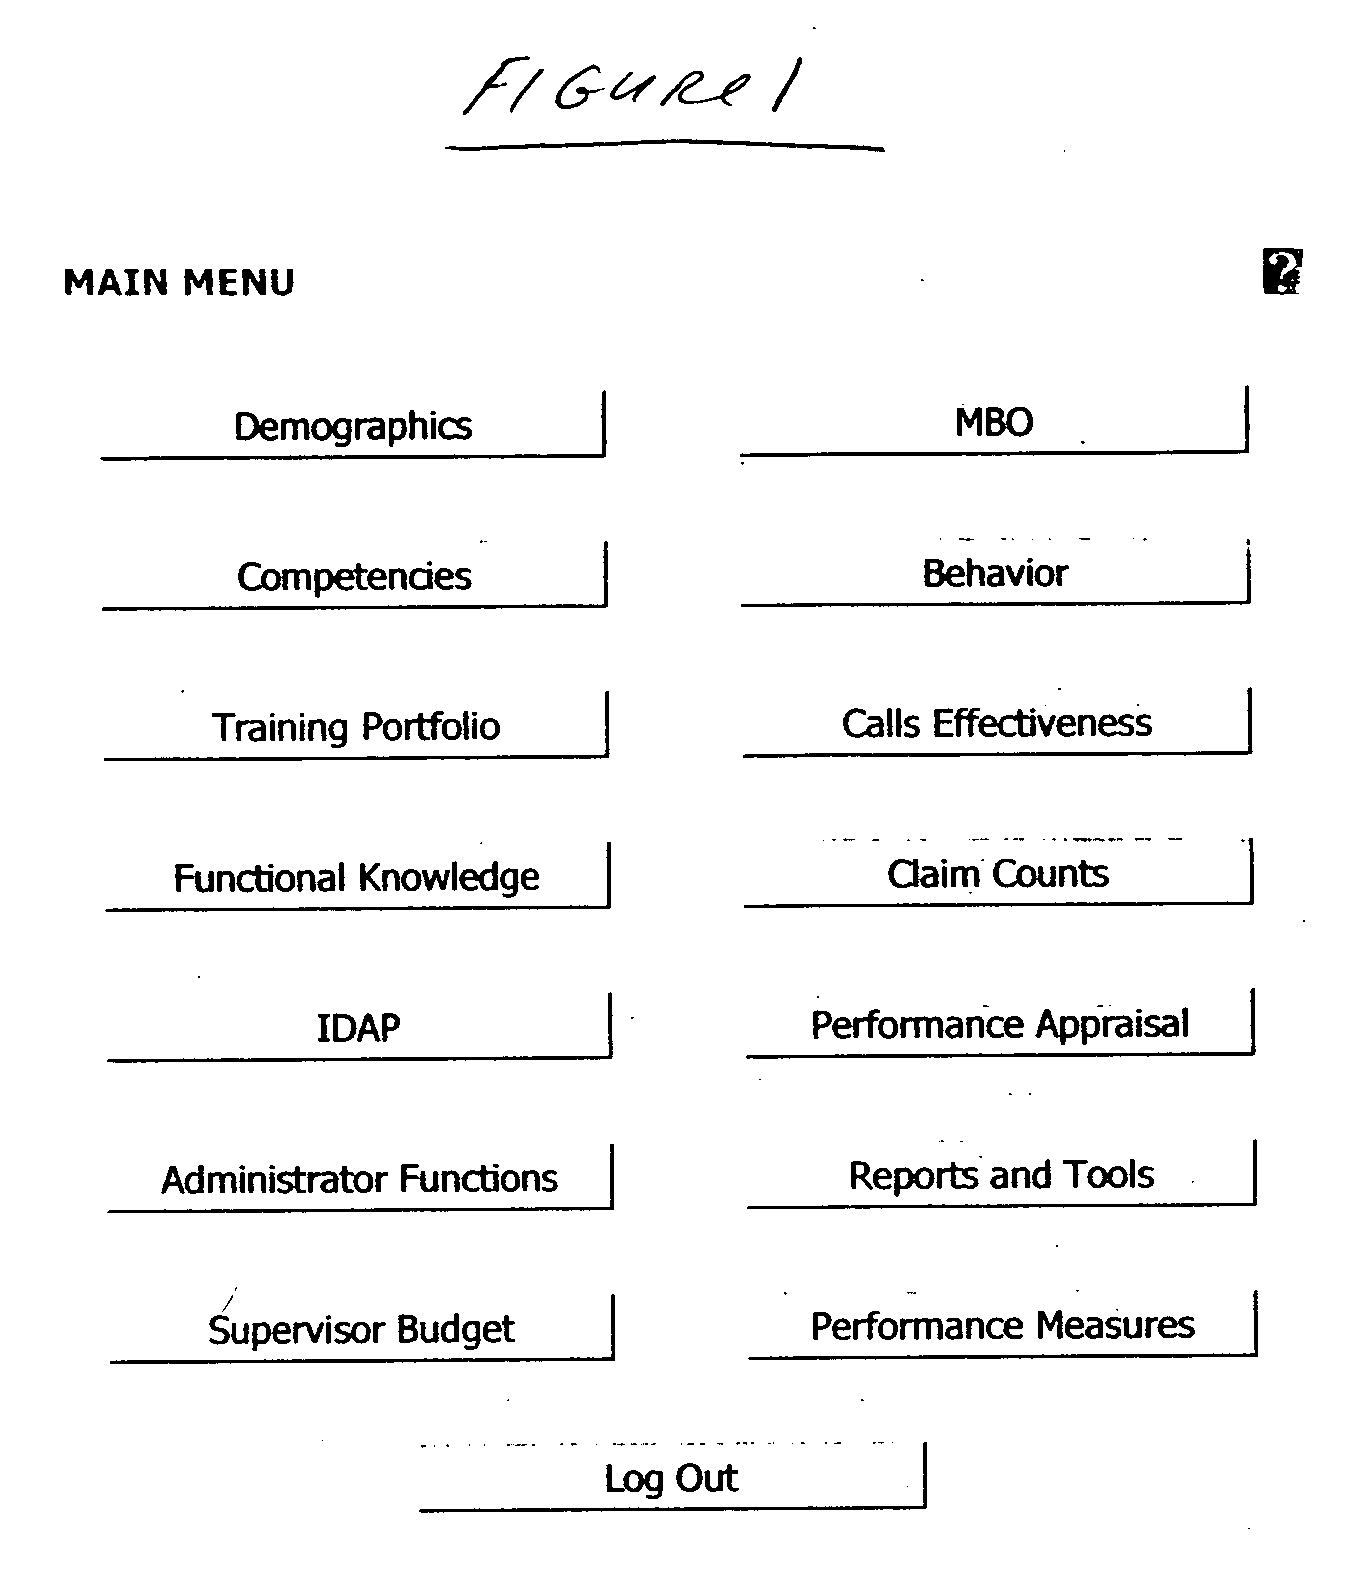 Computer-implemented apparatus and method for capturing and monitoring employee development and performance in a call center